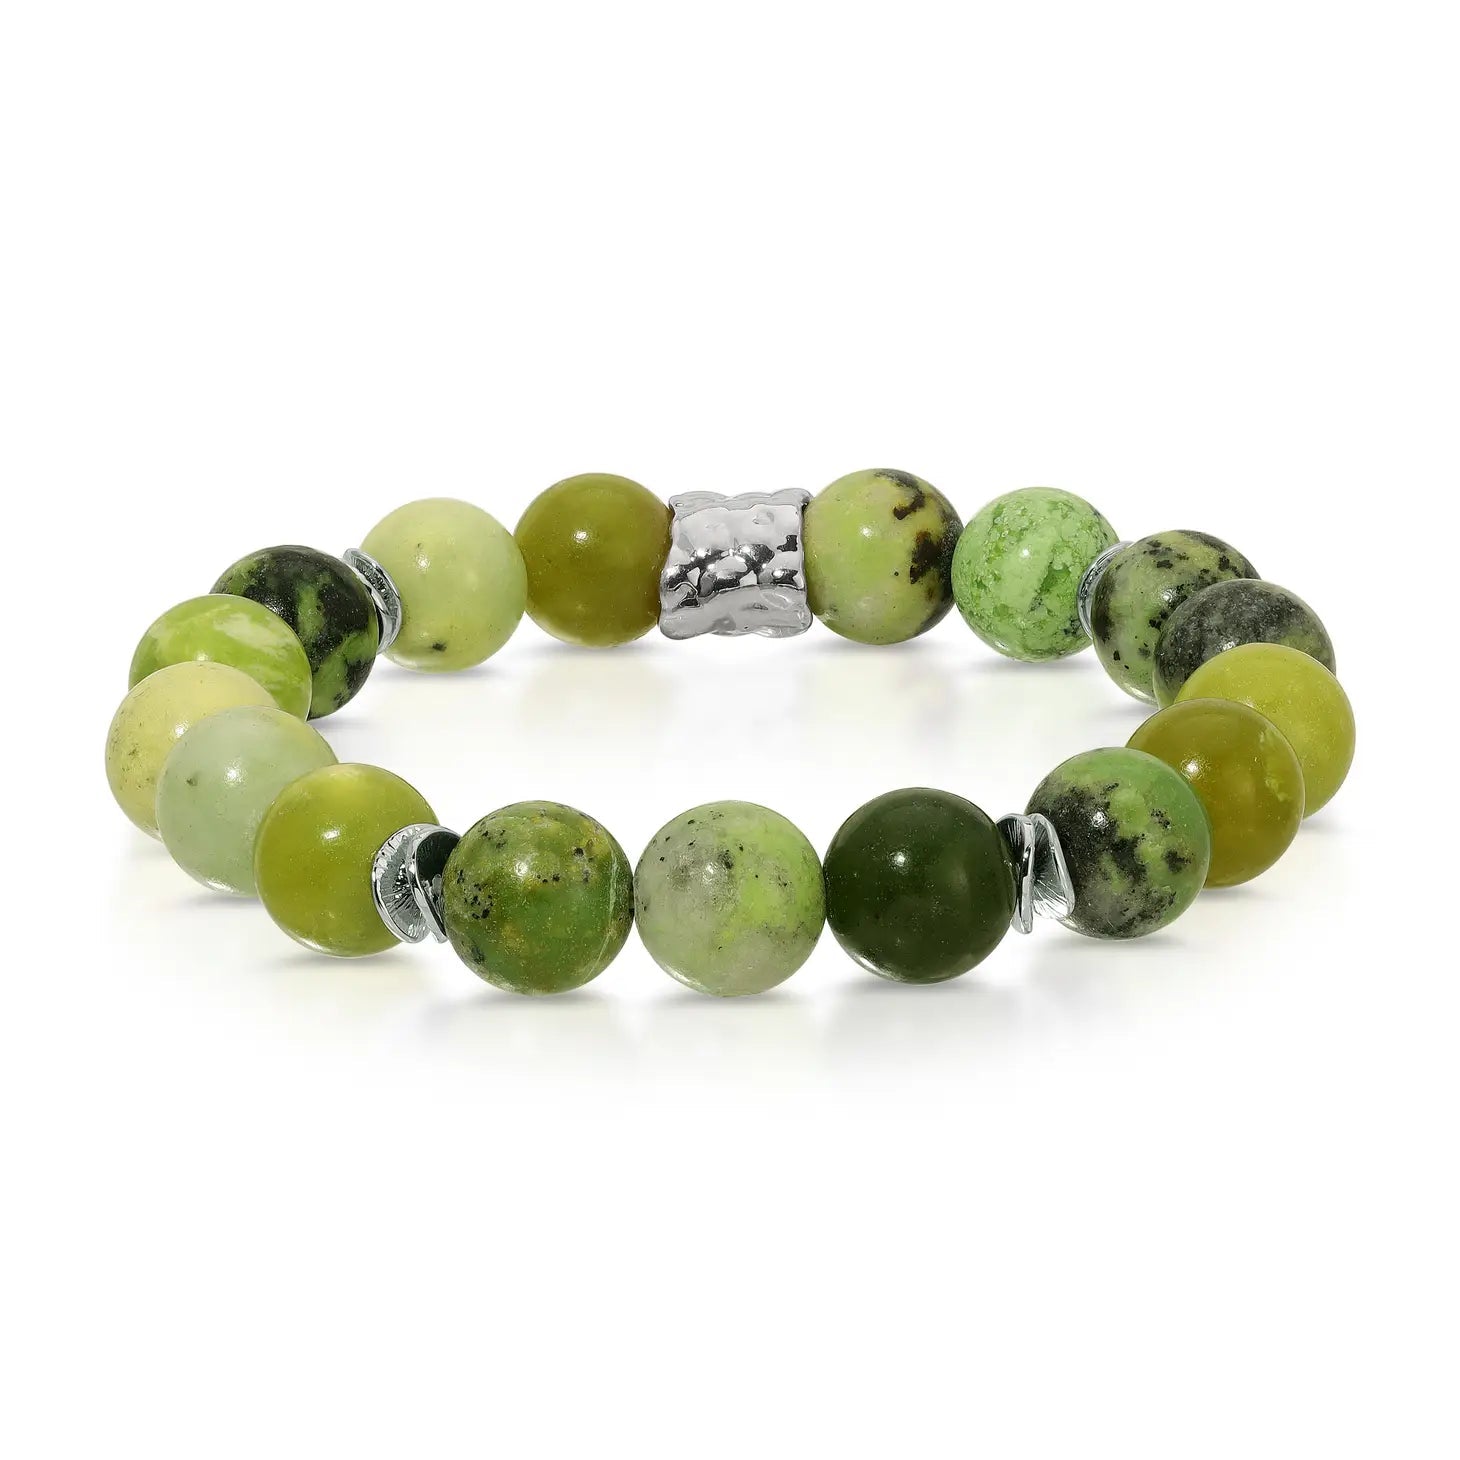 Grass Turquoise - 10mm Gemstone Bracelet - GB1288 - The Hare and the Moon